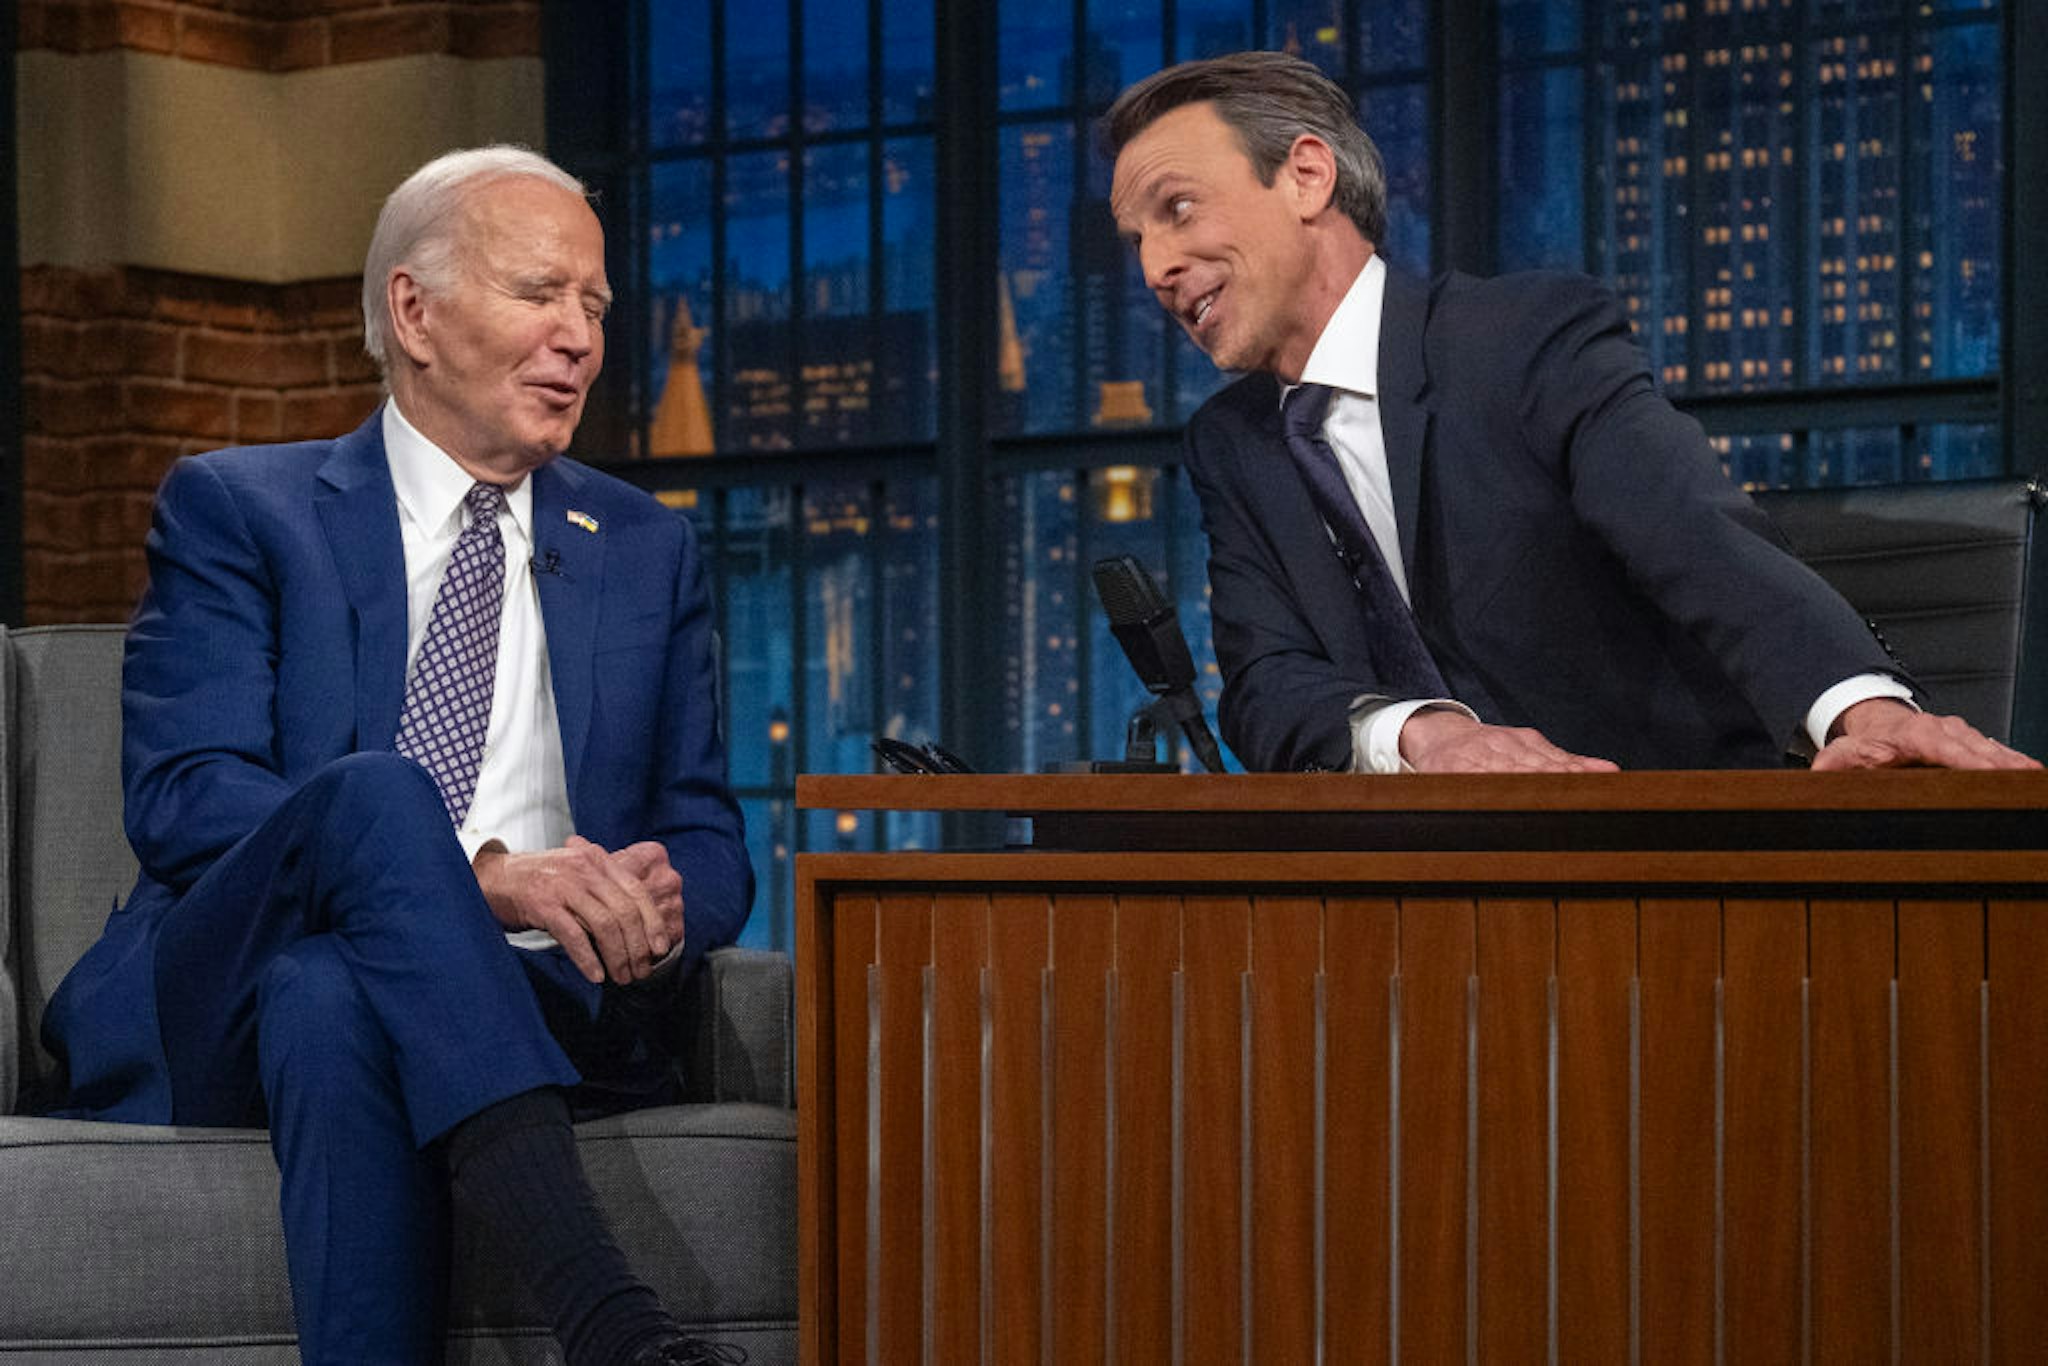 TOPSHOT - (L-R) US President Joe Biden speaks with host Seth Meyers during a taping of "Late Night with Seth Meyers" in New York City on February 26, 2024. (Photo by Jim WATSON / AFP) (Photo by JIM WATSON/AFP via Getty Images)